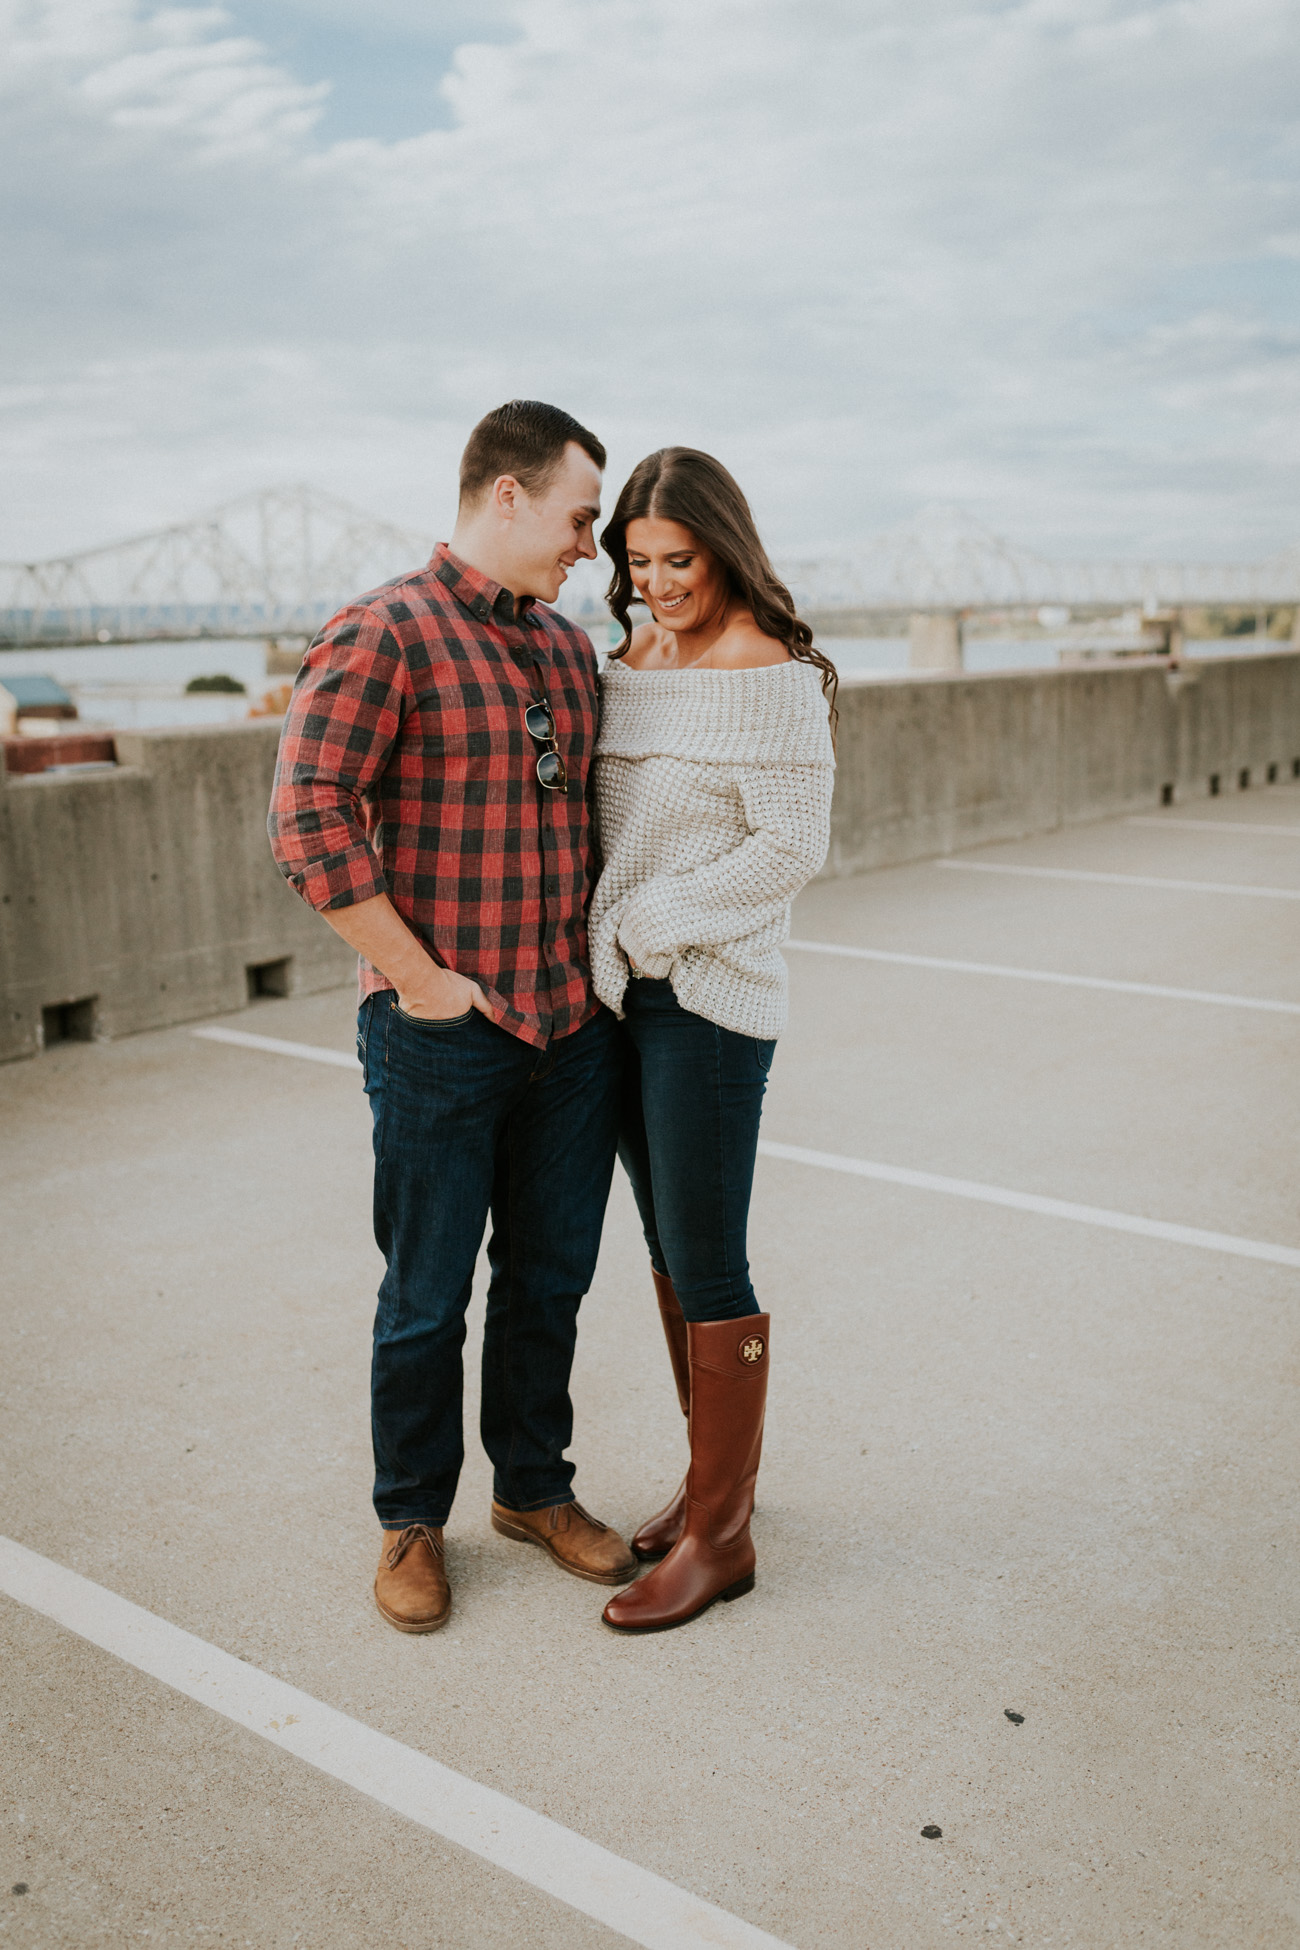 fall riding boots, off the shoulder sweater, cozy sweater, cozy fall sweaters, bb dakota sweaters, tory burch riding boots, tory burch boots, tory burch satchel, fall style, buffalo plaid shirt, fall fashion, fall outfit ideas, couple outfits, fall couples outfit, fall couple outfits // grace wainwright a southern 